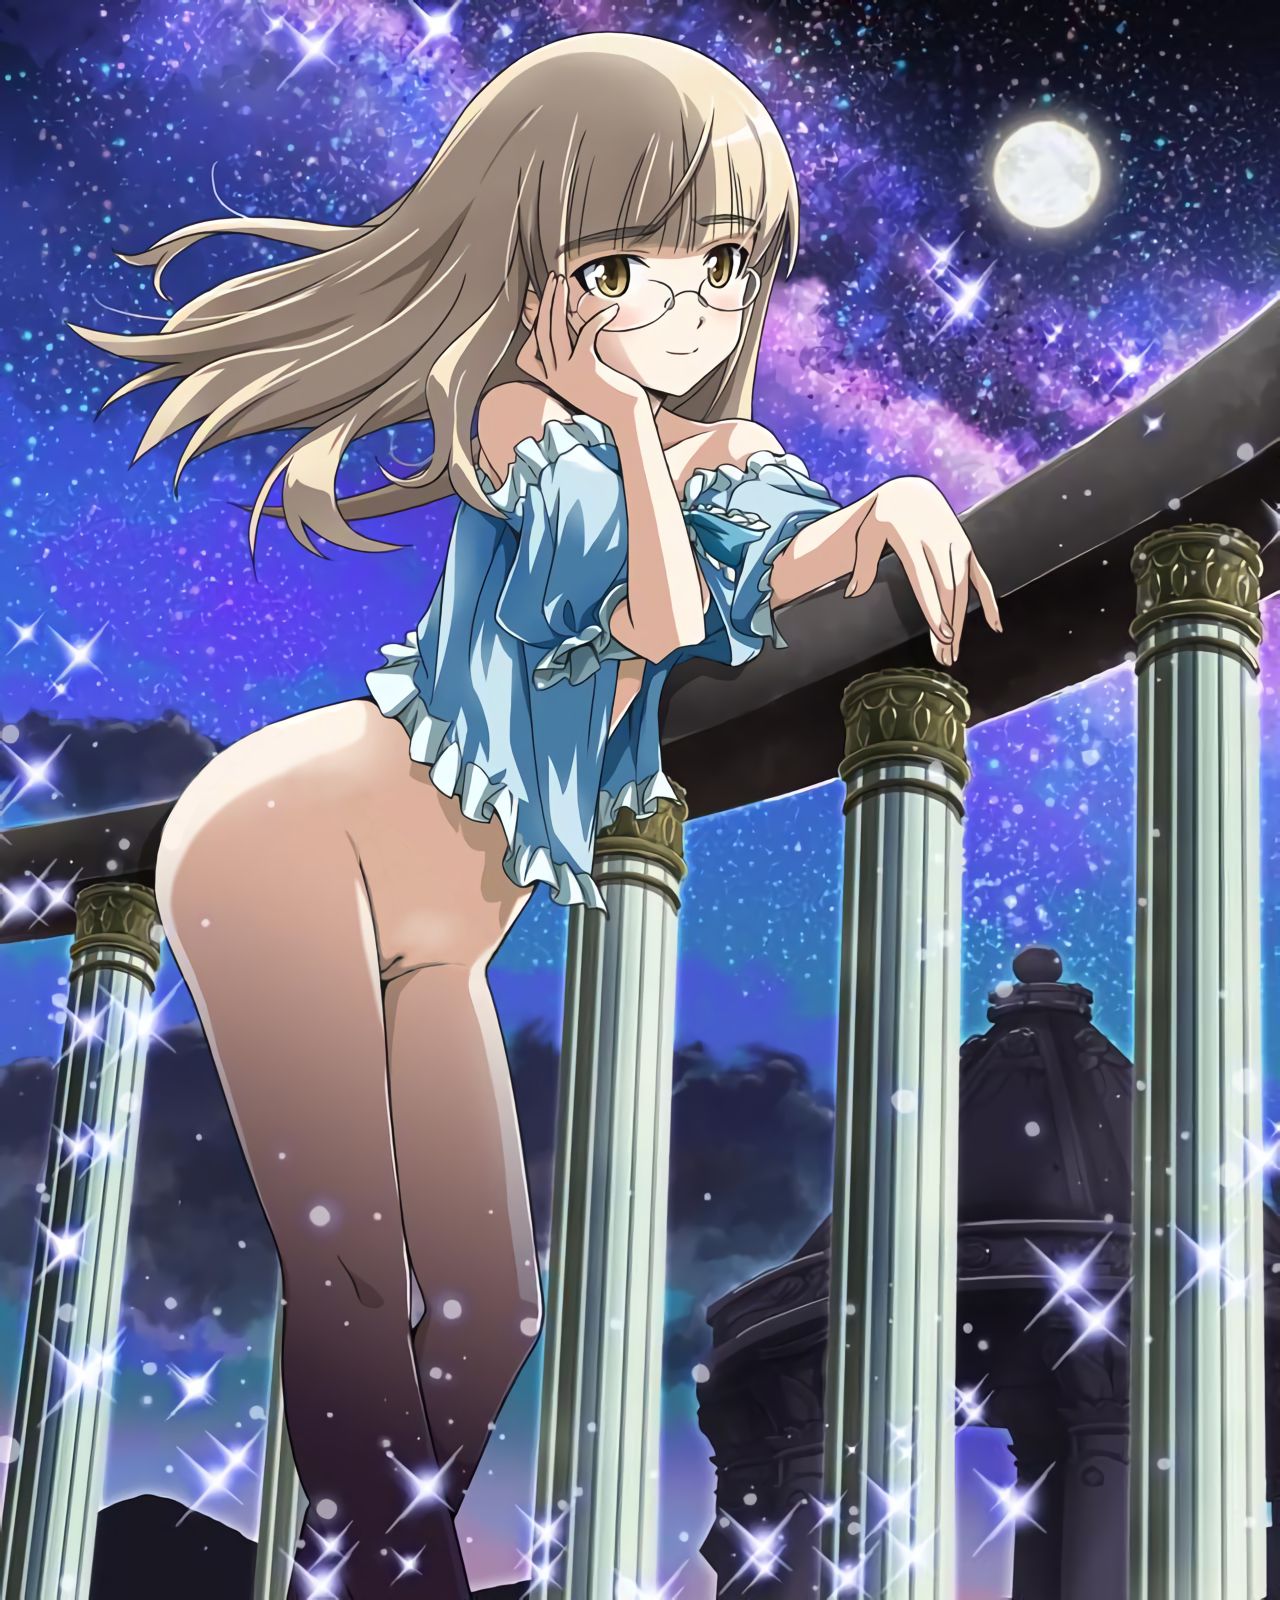 [Stripping Cora] drop a large amount of stripped cora image, such as anime official picture Part 269 10